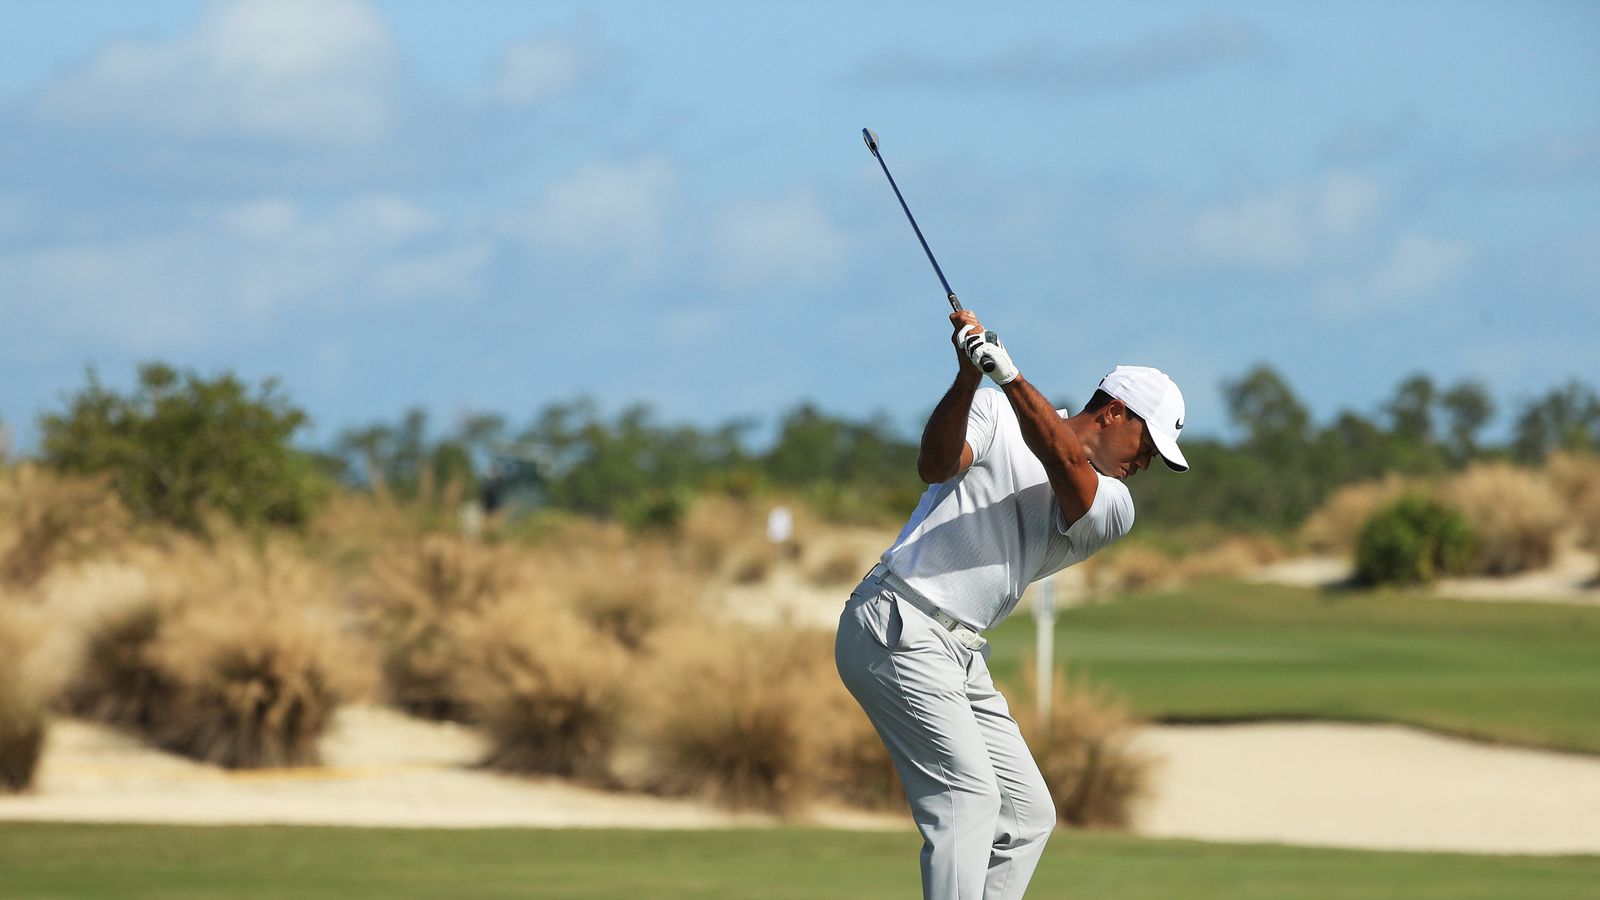 The best five shots from Tiger Woods on his return to action Golf